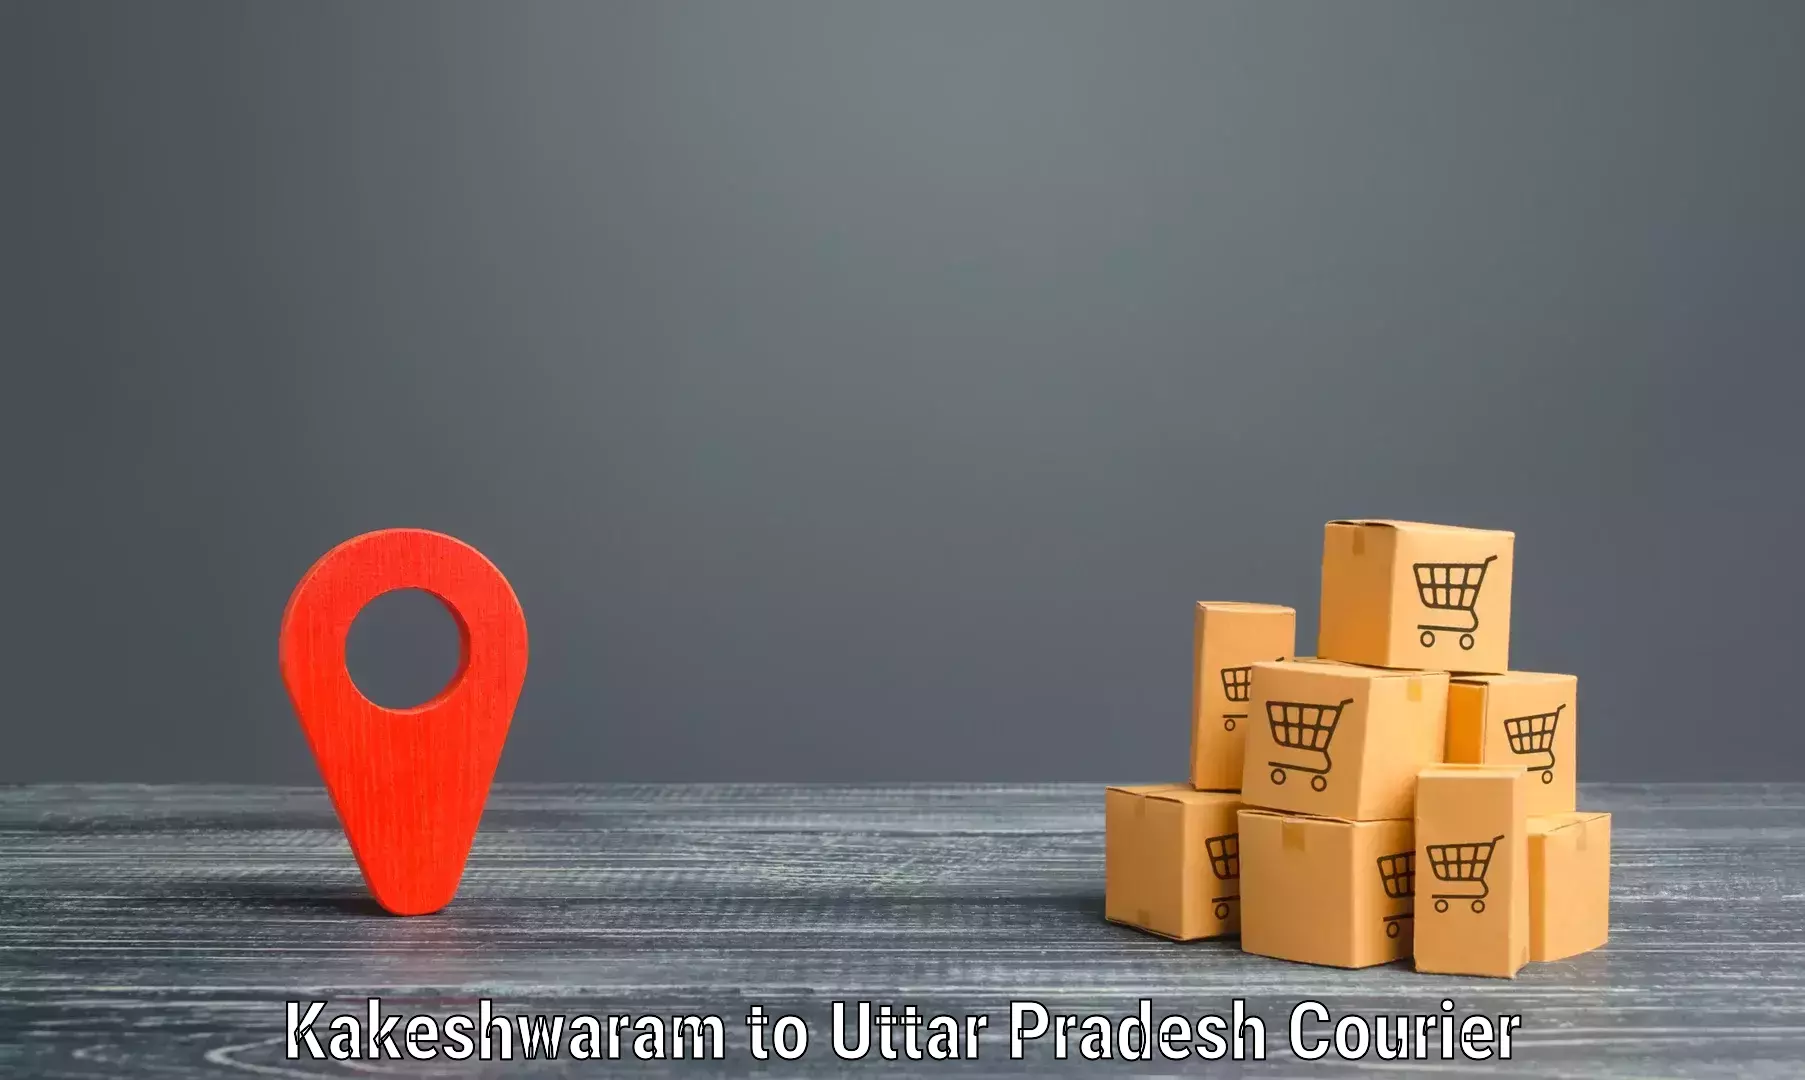 Quality courier services in Kakeshwaram to Mahoba